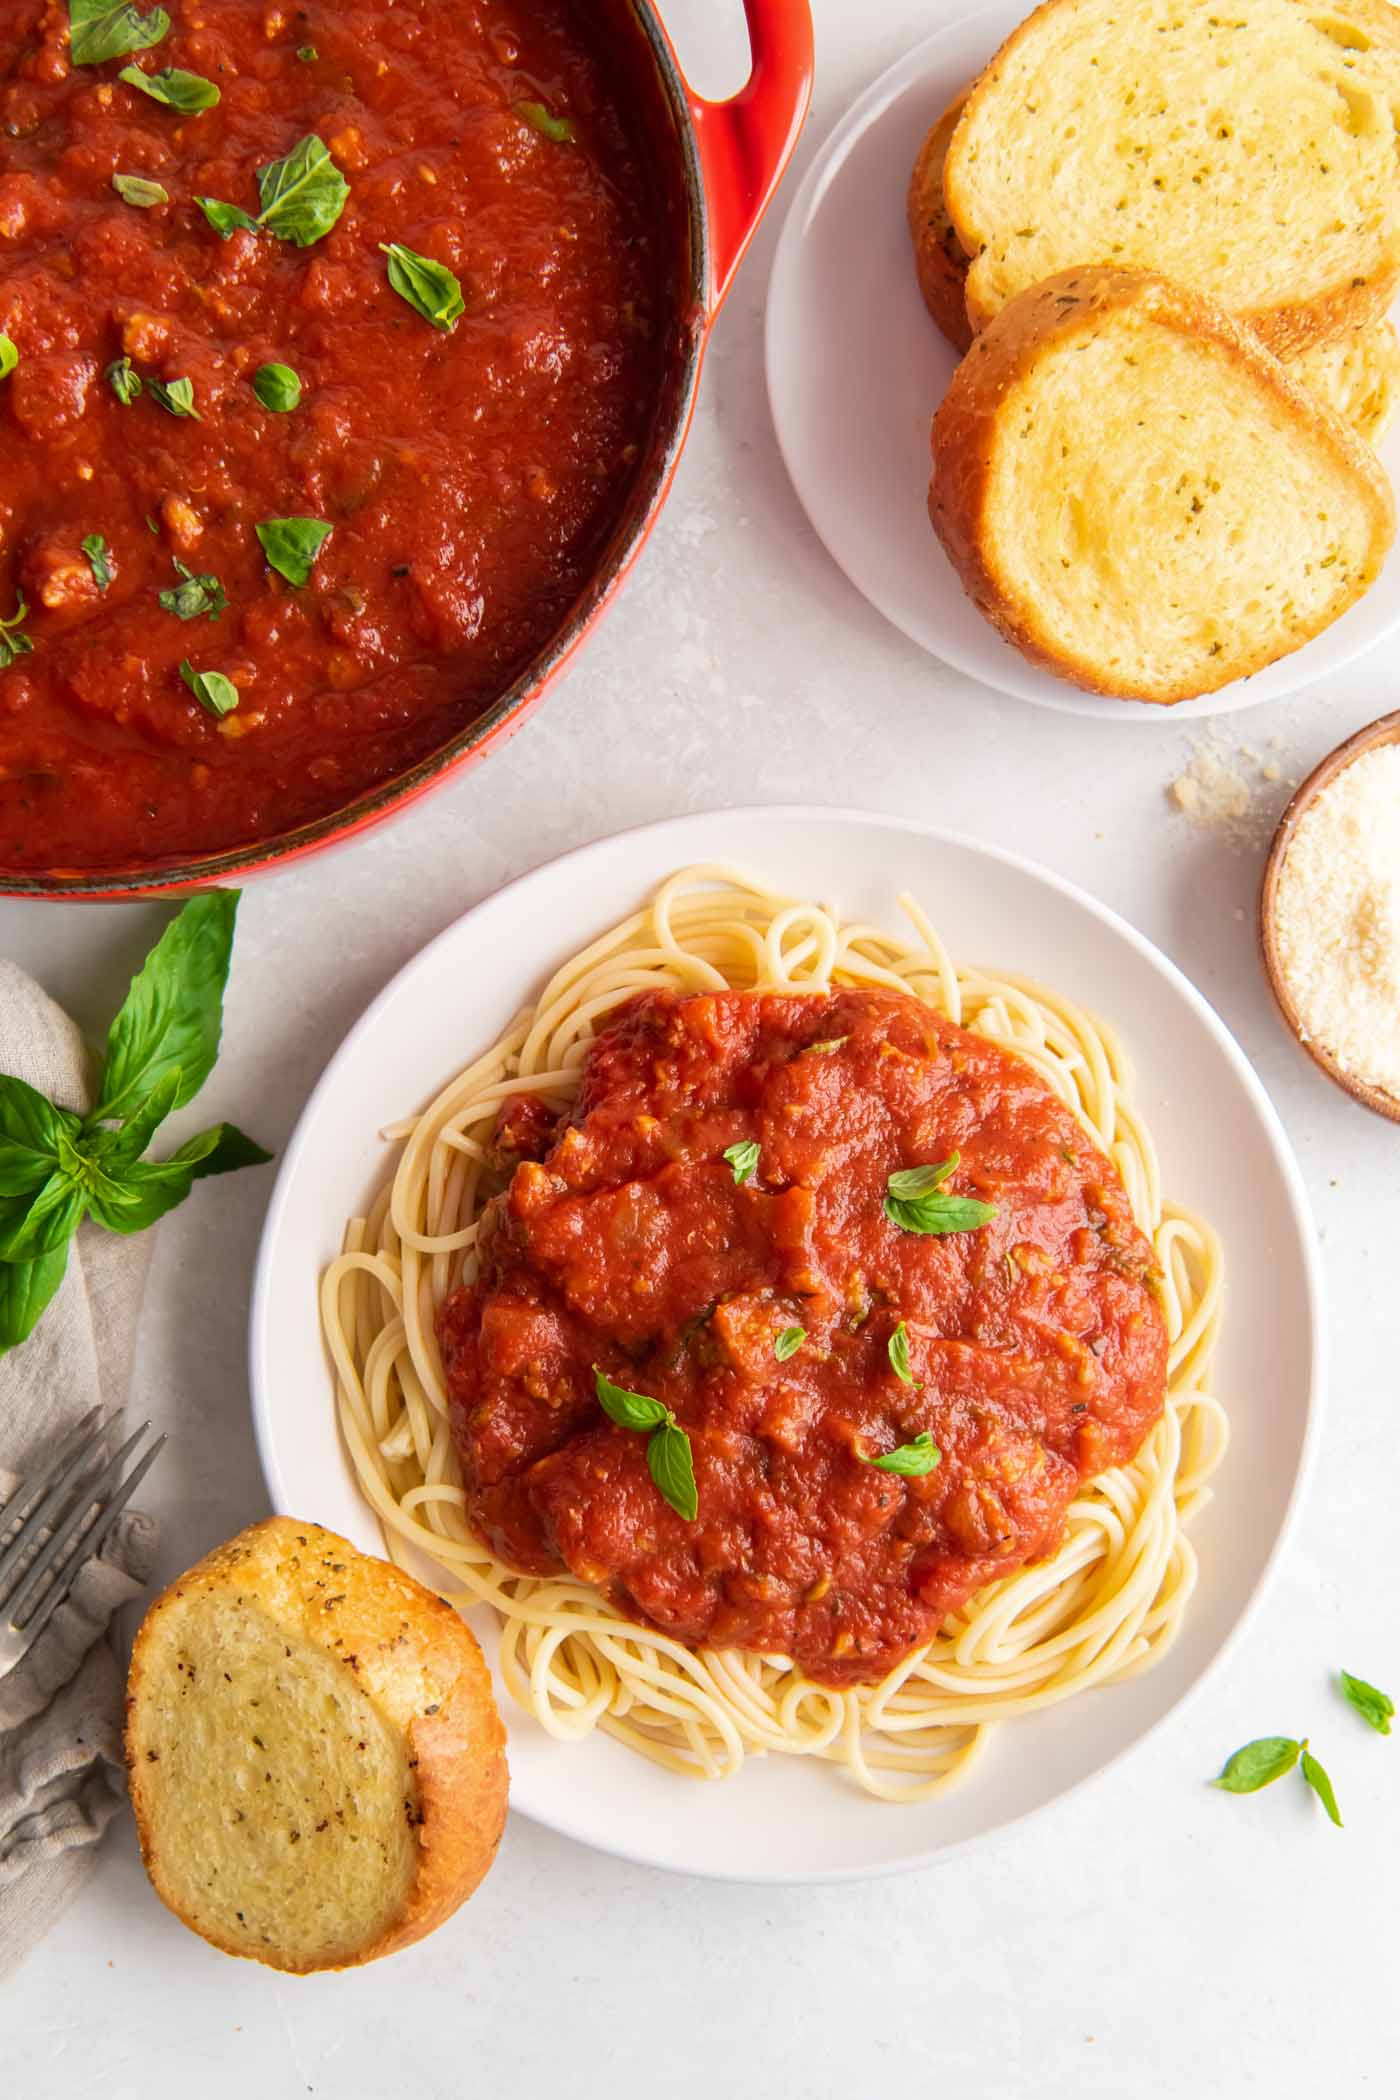 Plate of spaghetti with sauce served with garlic bread, with pot of sauce in background.